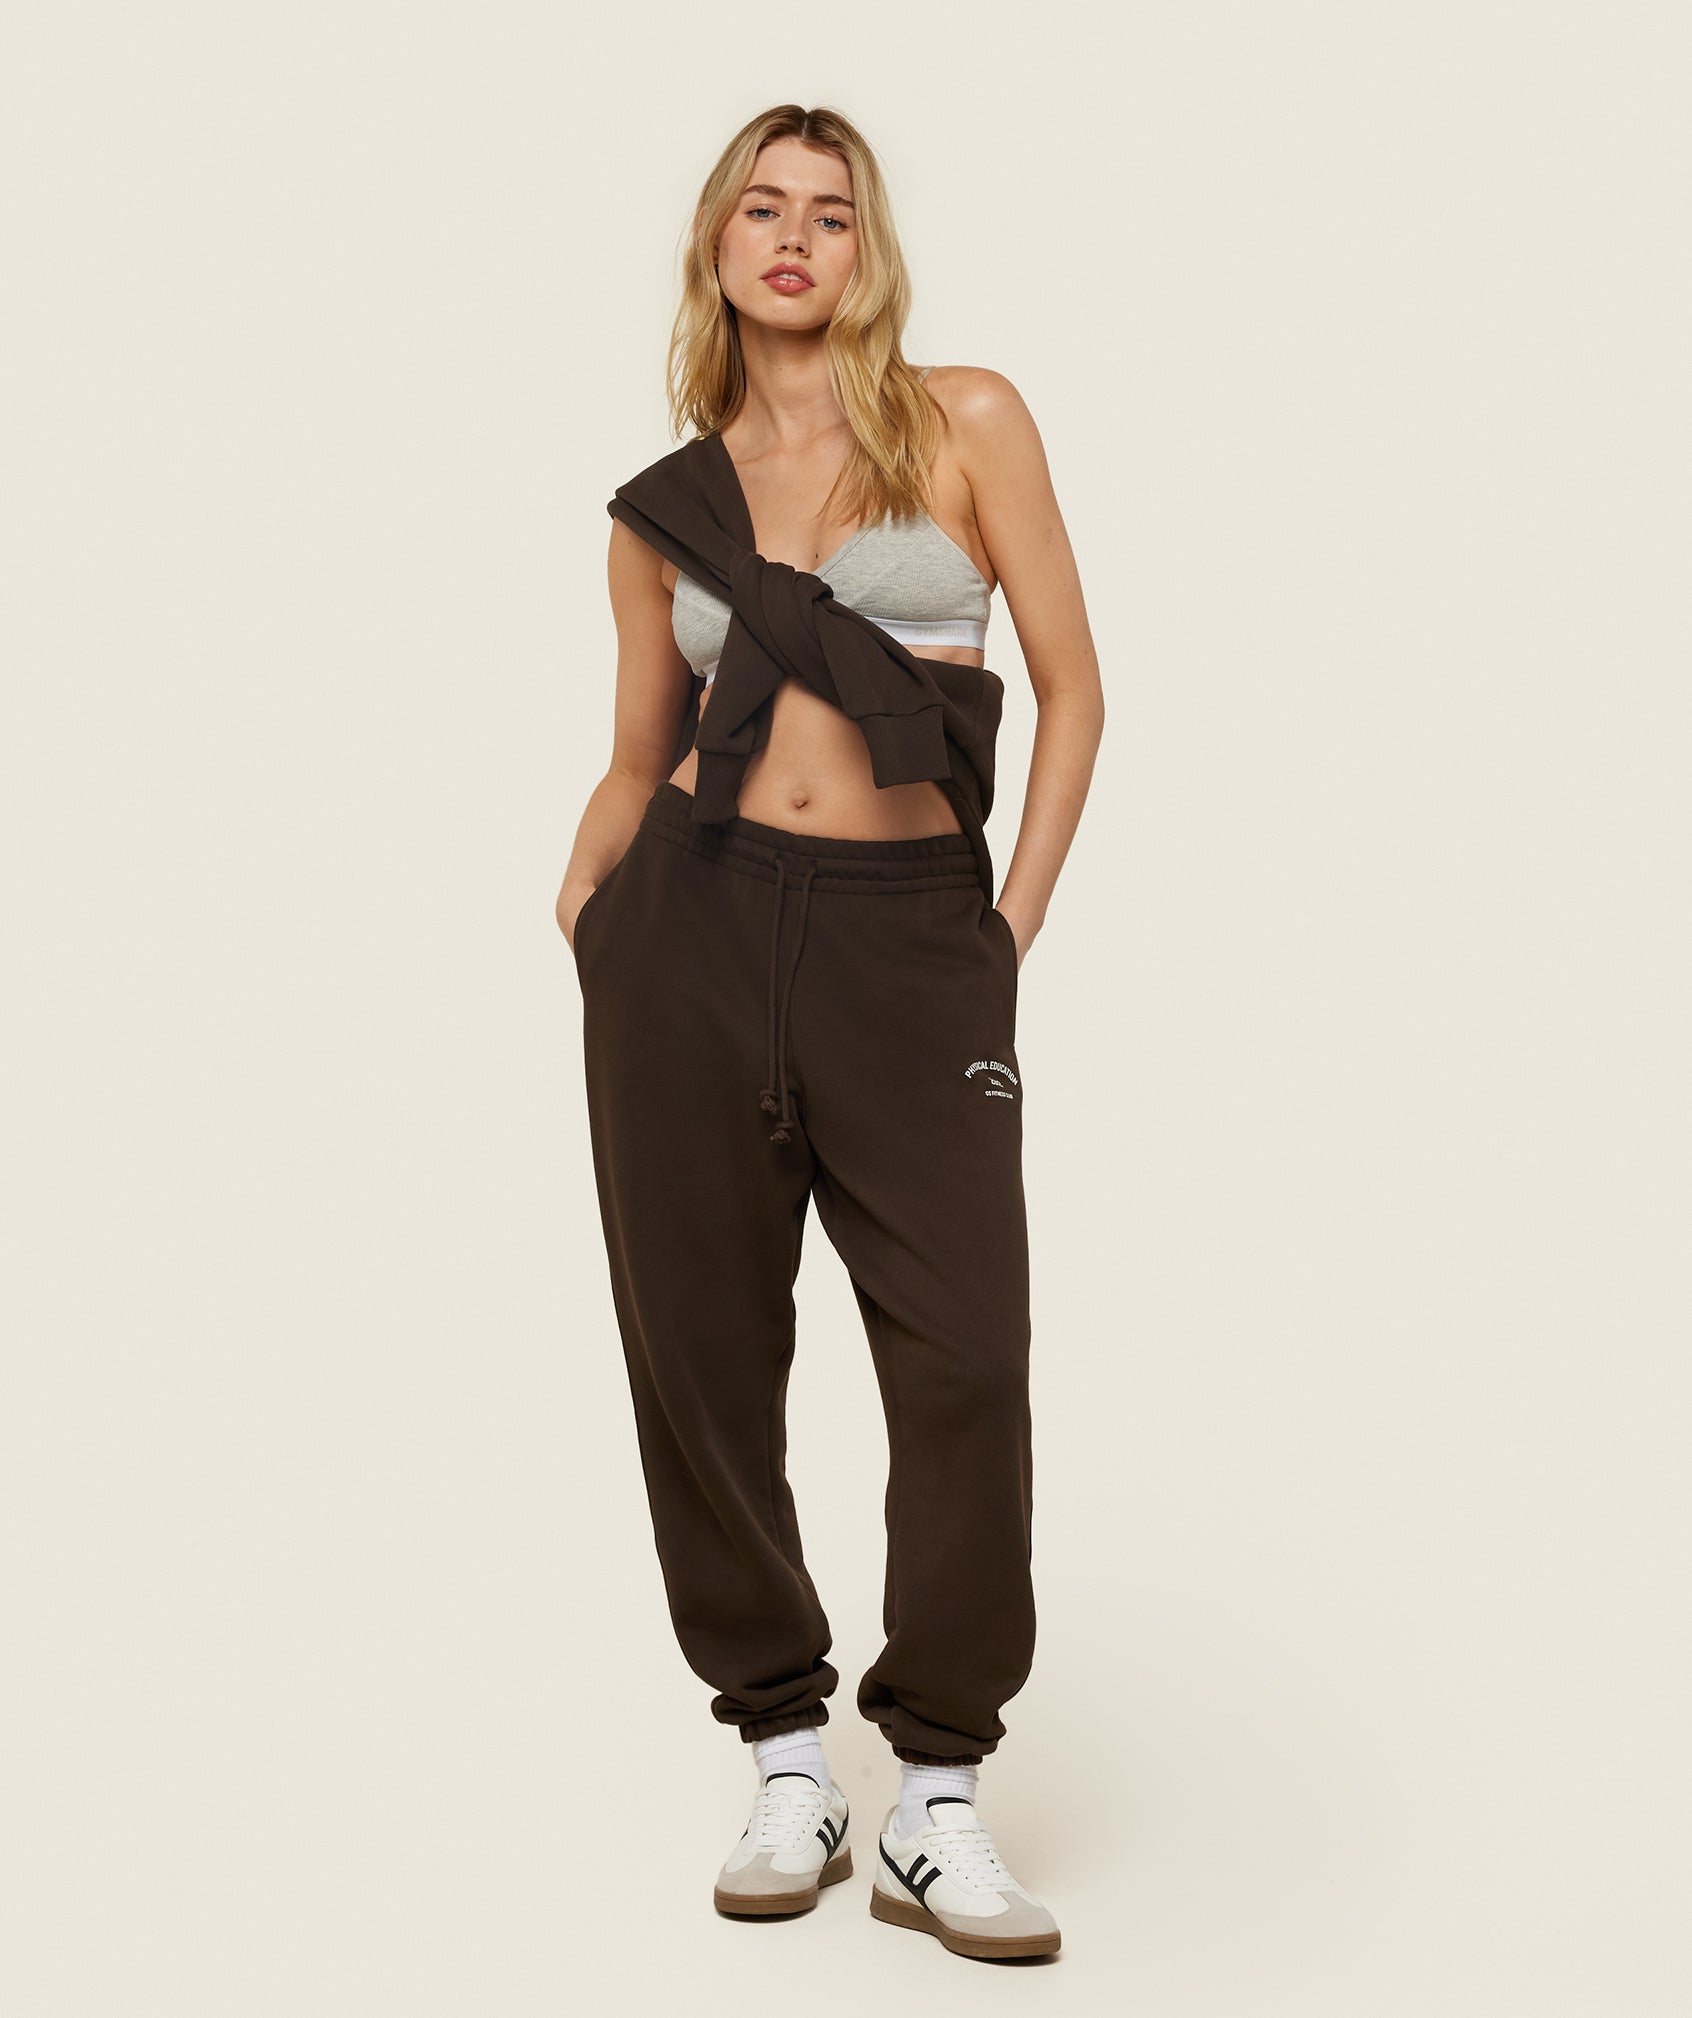 Phys Ed Graphic Sweatpants in Archive Brown - view 3